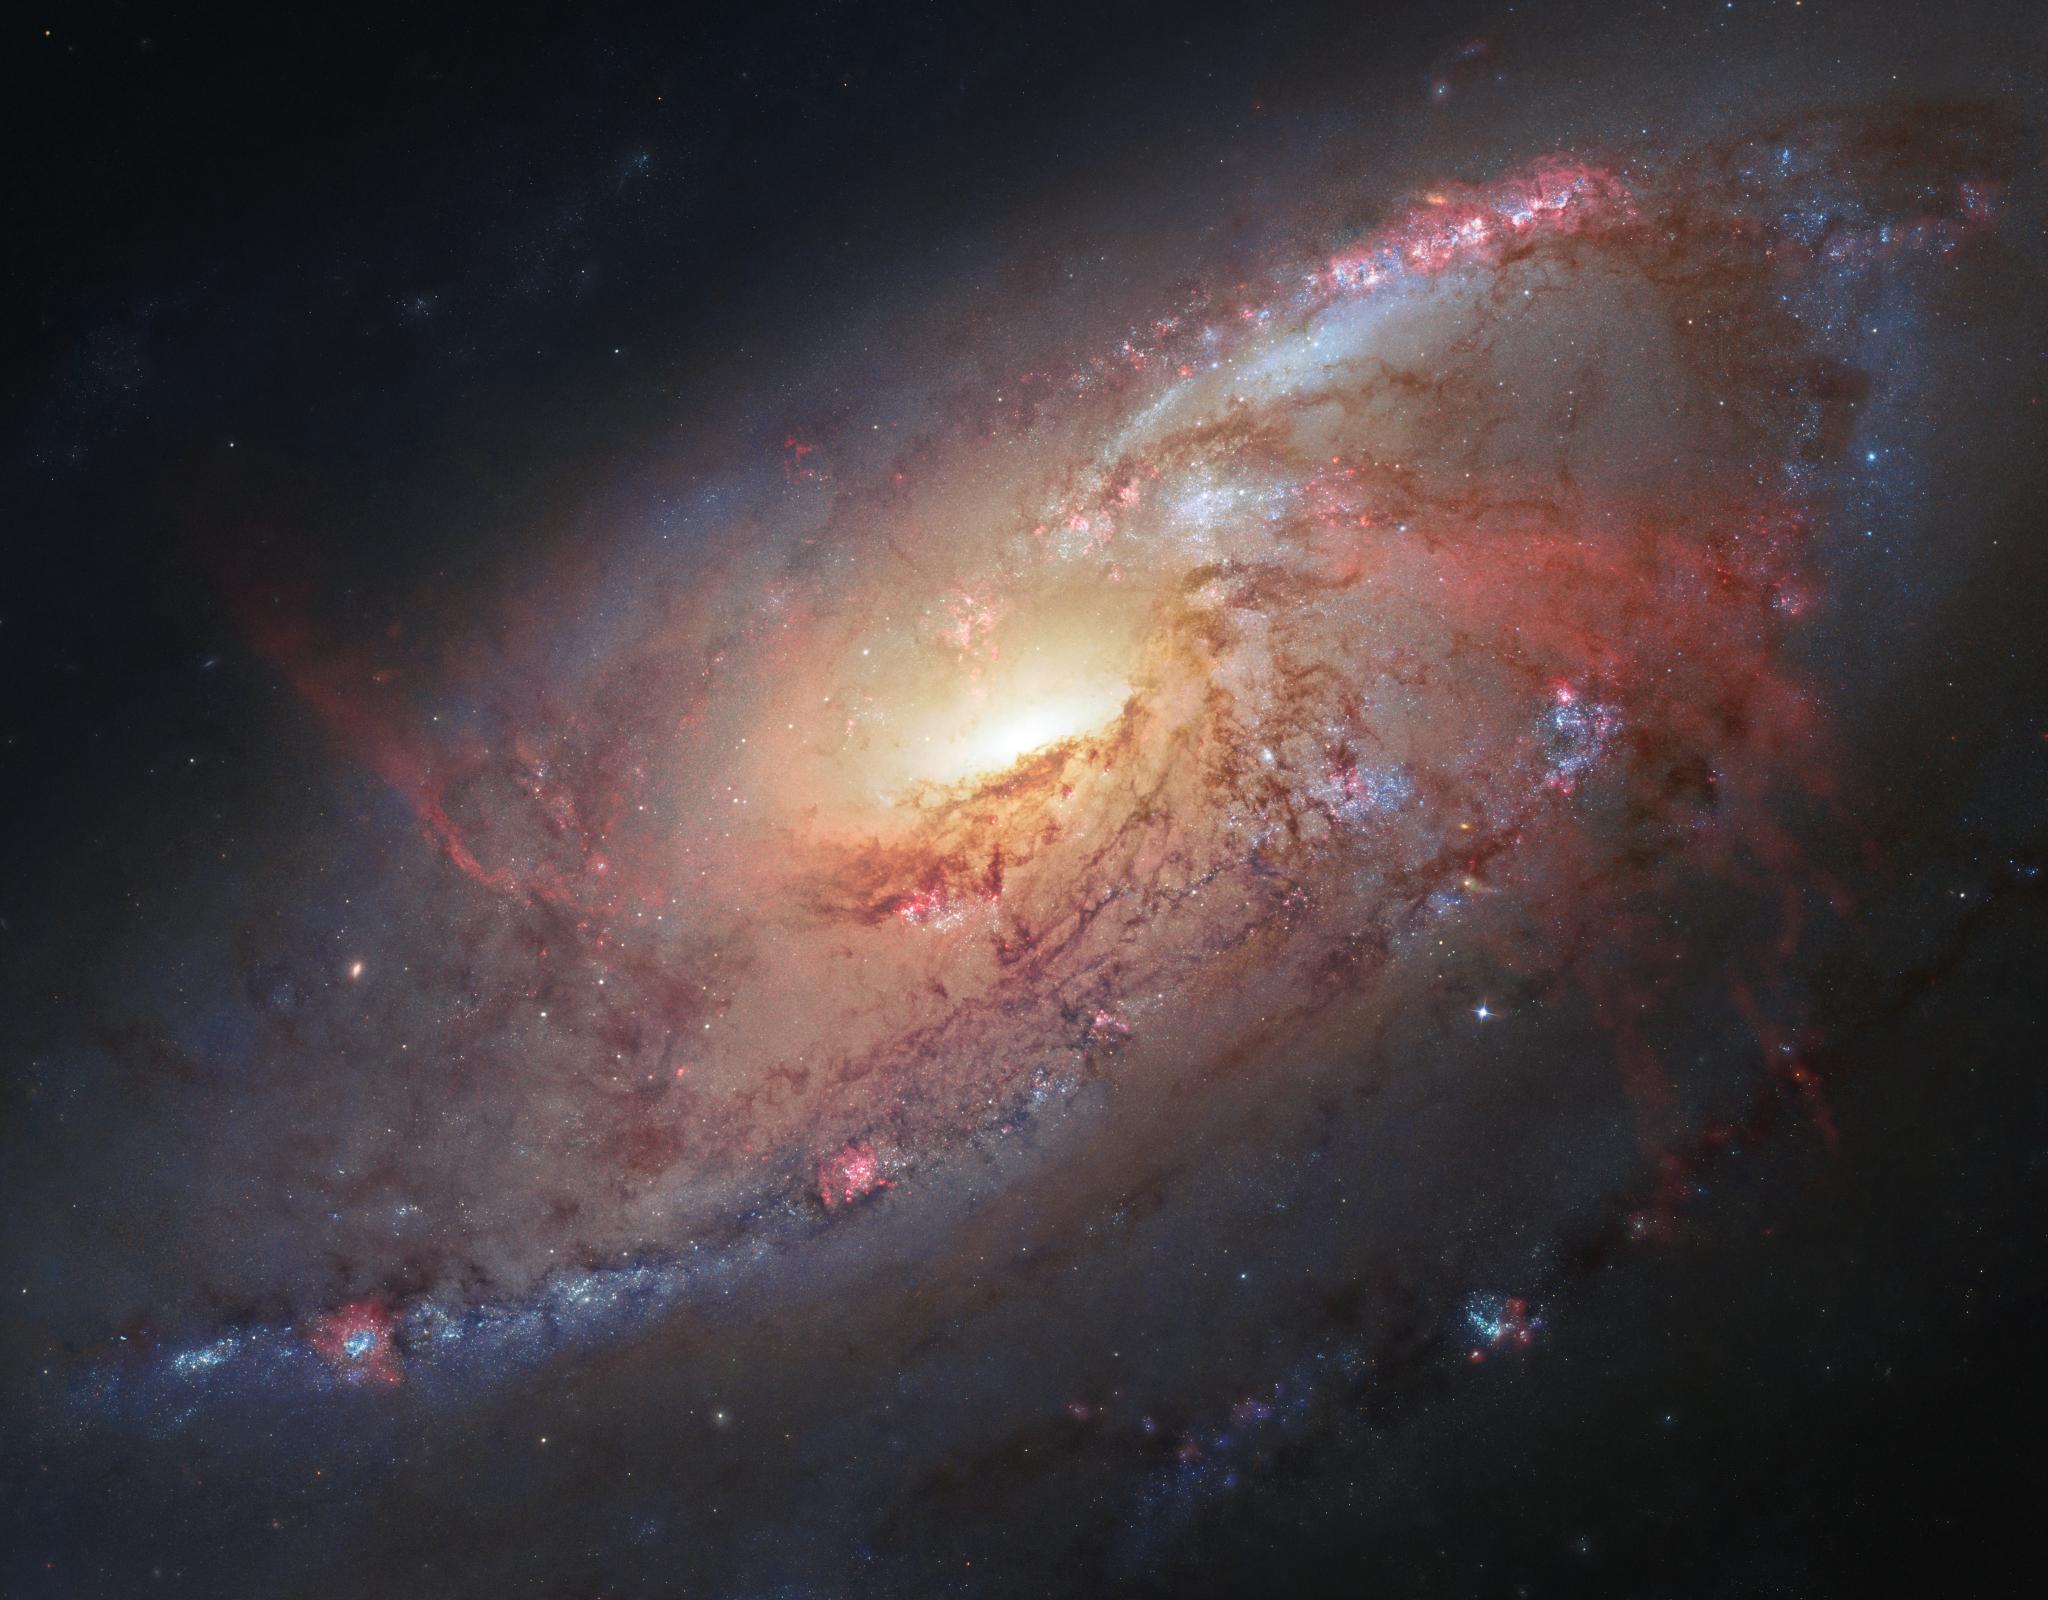 Working with astronomical image processors at the Space Telescope Science Institute in Baltimore, Md., renowned astro-photographer Robert Gendler has taken science data from the Hubble Space Telescope archive and combined it with his own ground-based observations to assemble a photo illustration of the magnificent spiral galaxy M106.